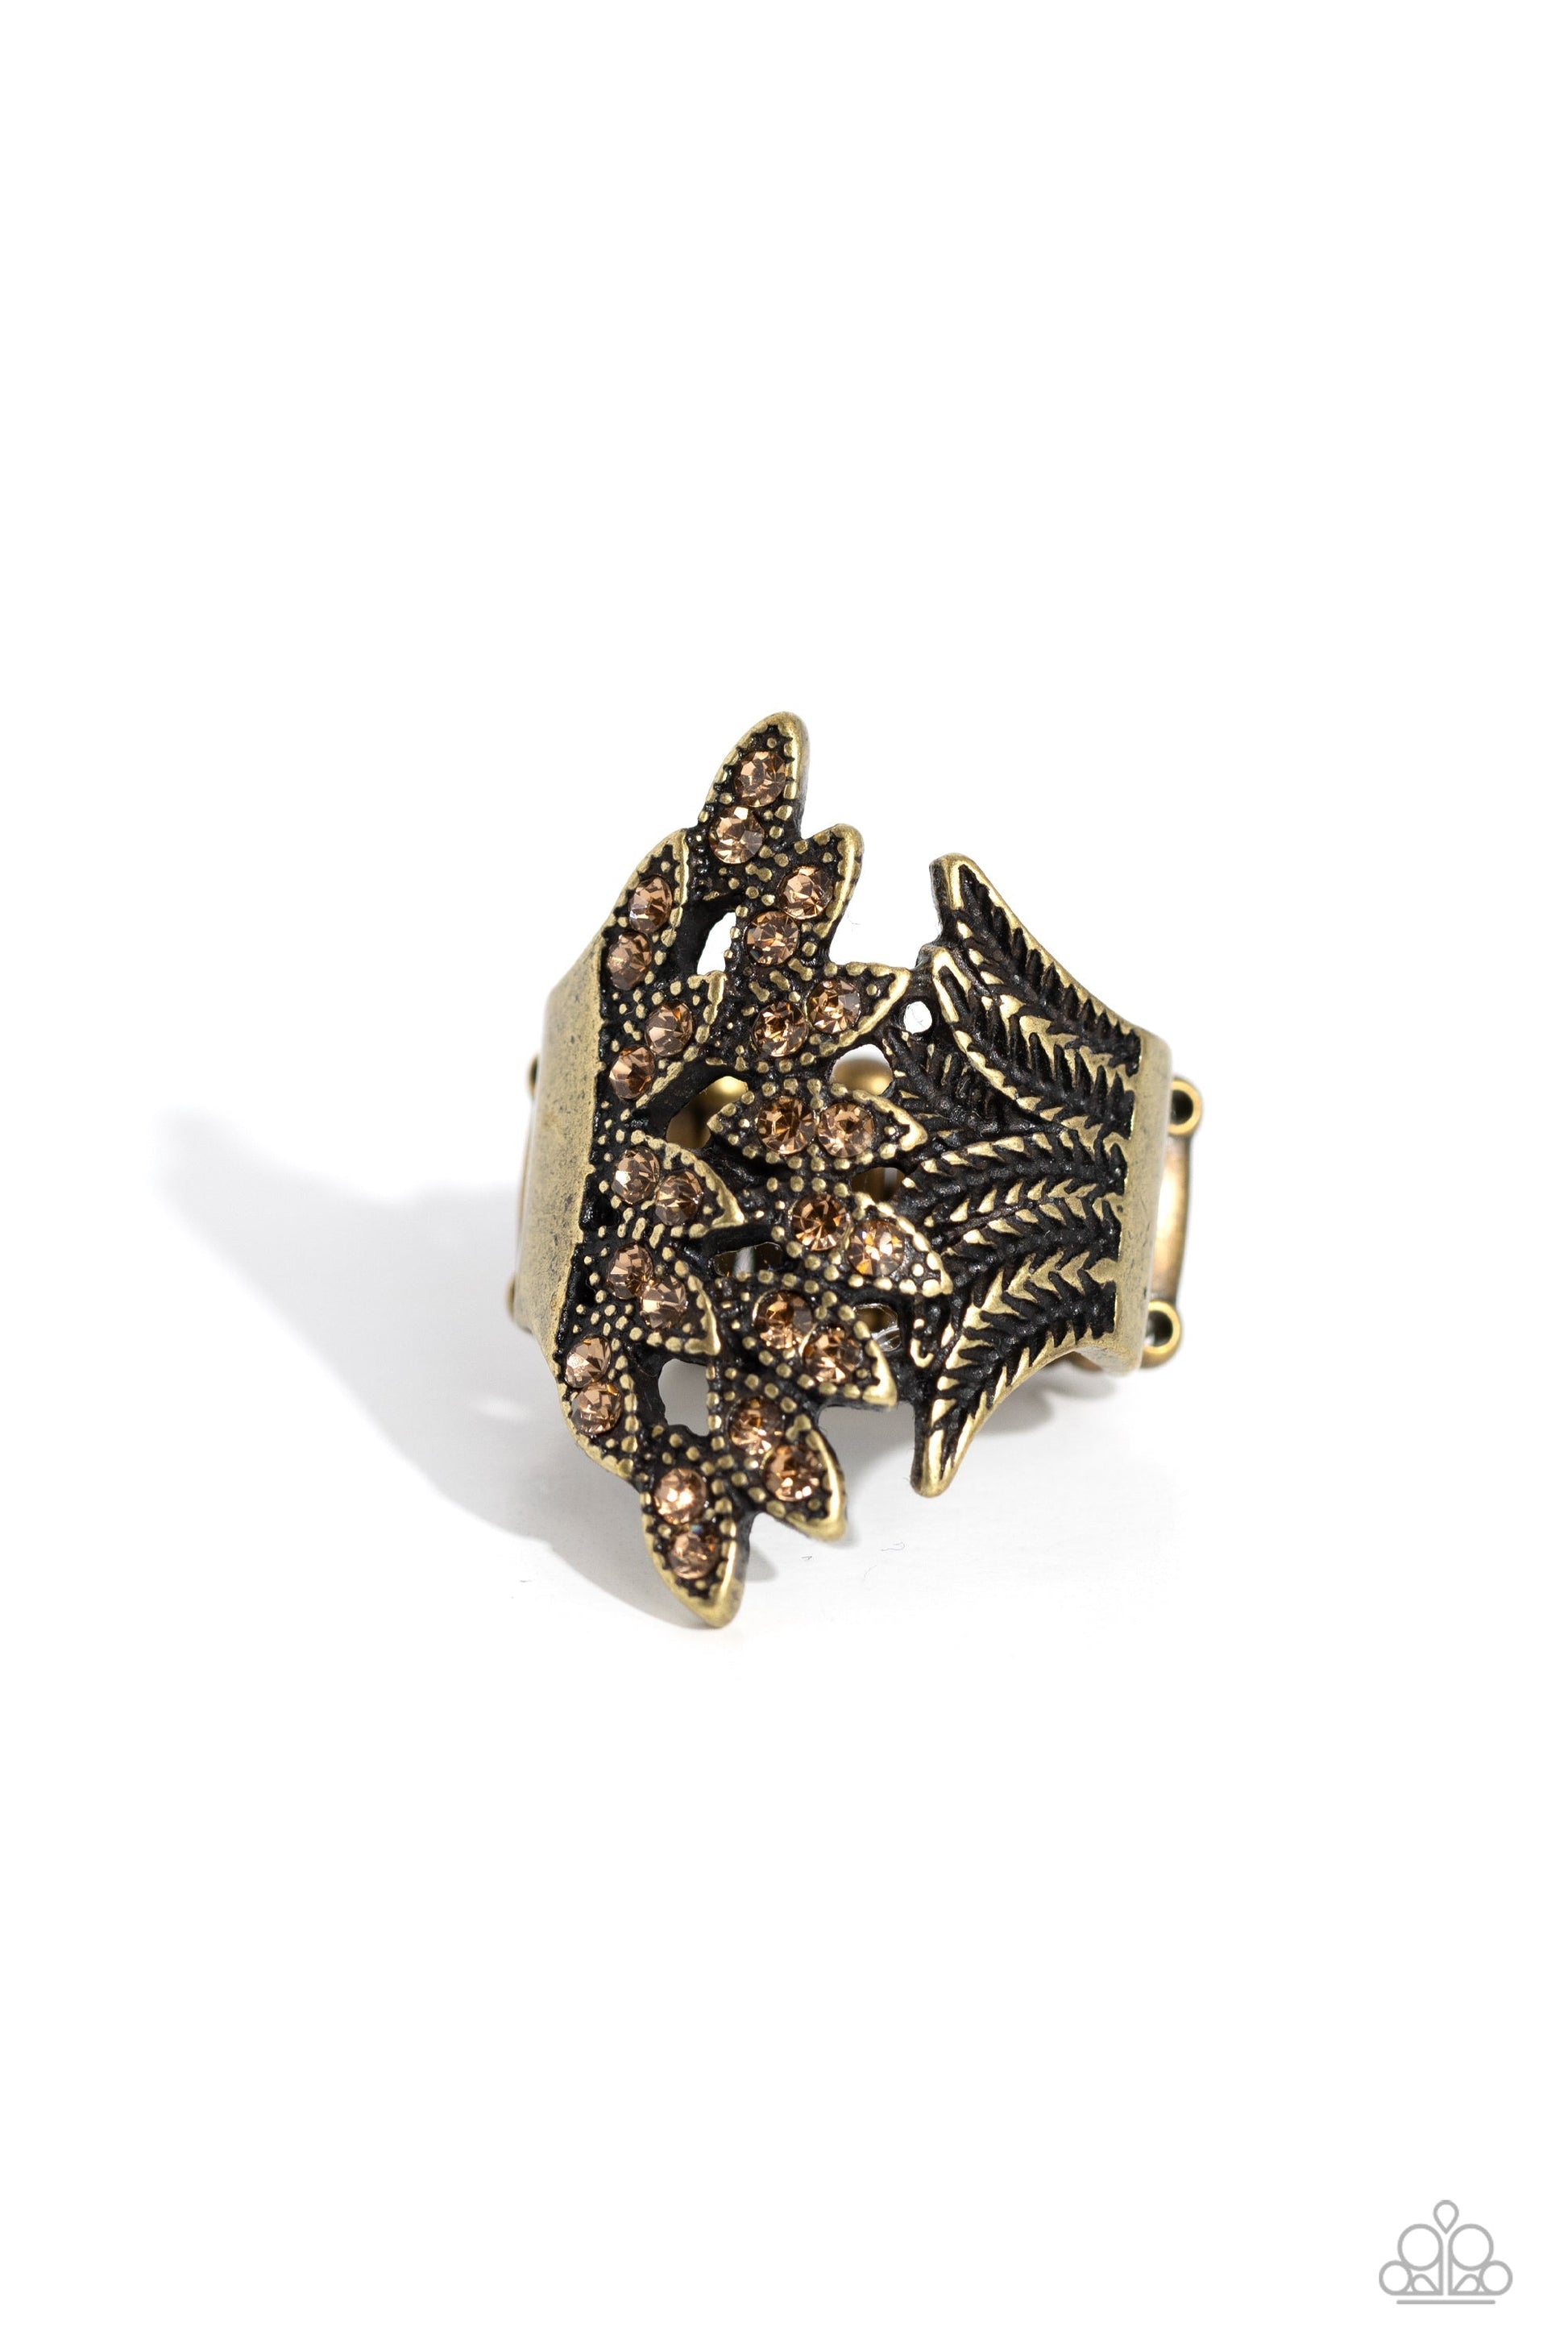 Fearlessly Feathered - Brass Topaz Rhinestone Ring - Paparazzi Accessories - Golden topaz rhinestone dotted frames delicately overlap with a fan of textured brass feathers, layering into a prismatic plume across the finger.